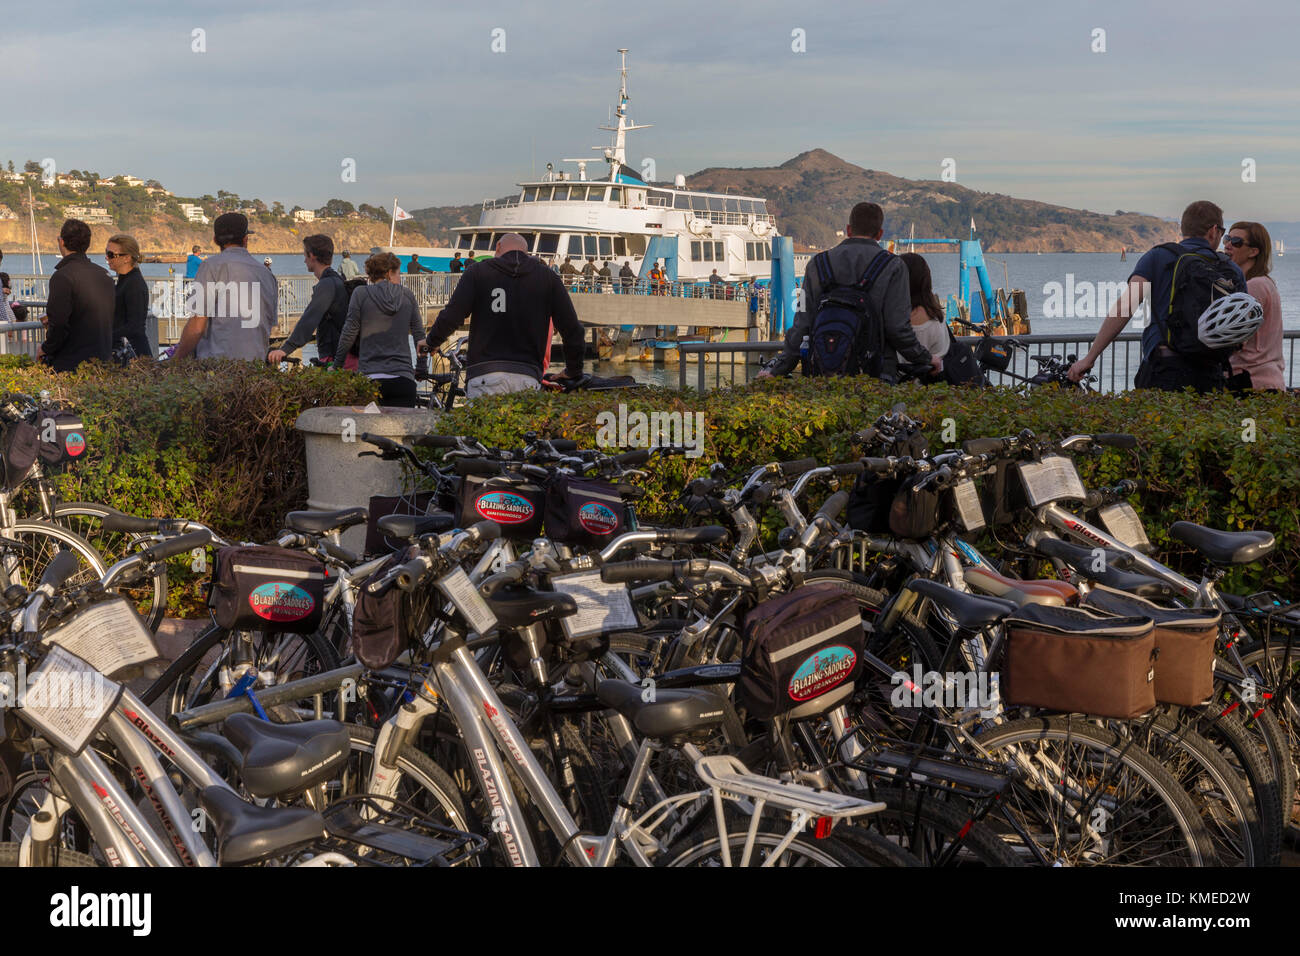 bicycles,people and ferry in background,Sausalito,California,USA Stock Photo